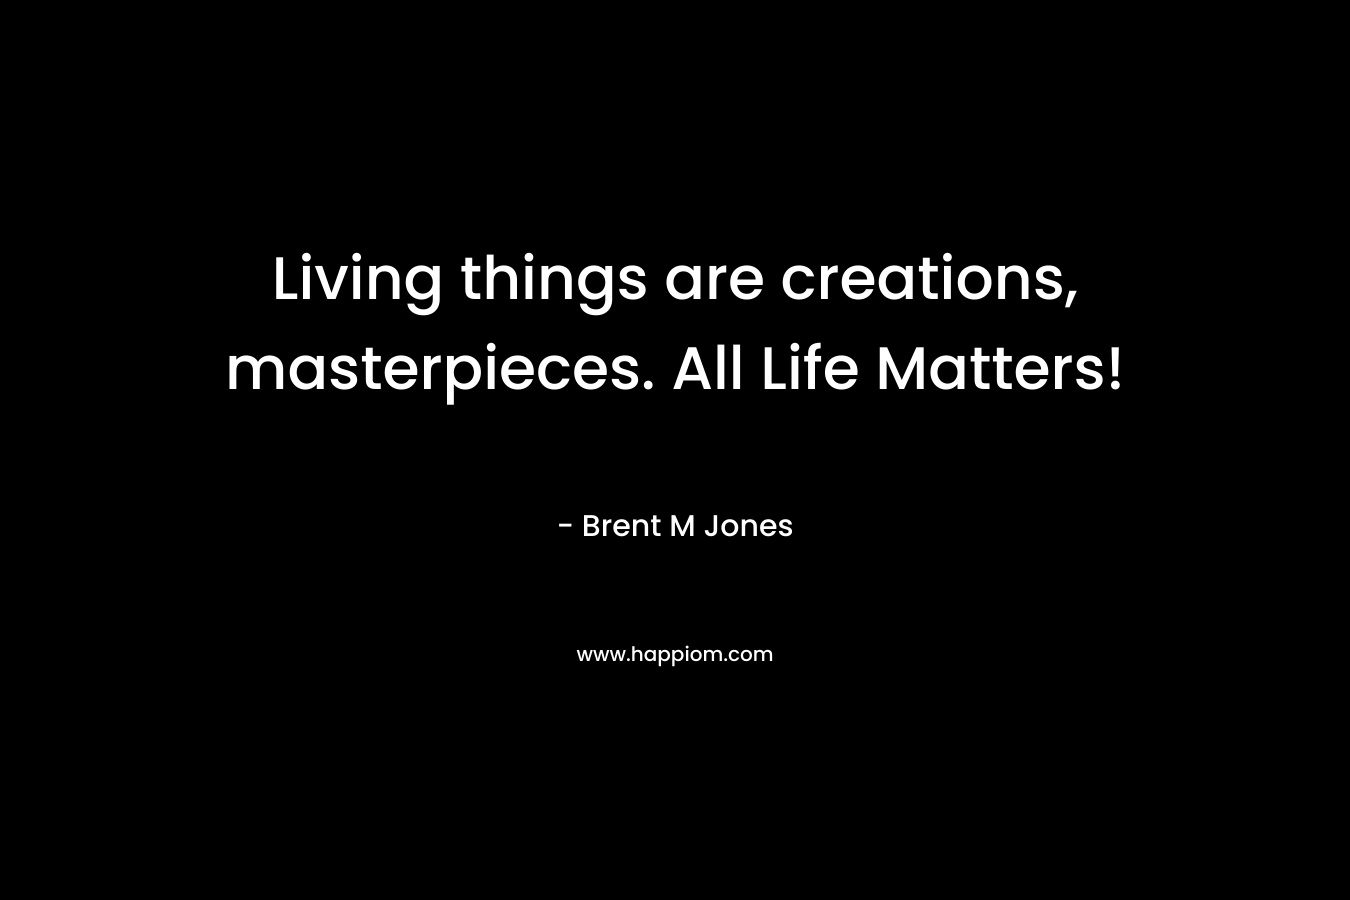 Living things are creations, masterpieces. All Life Matters!